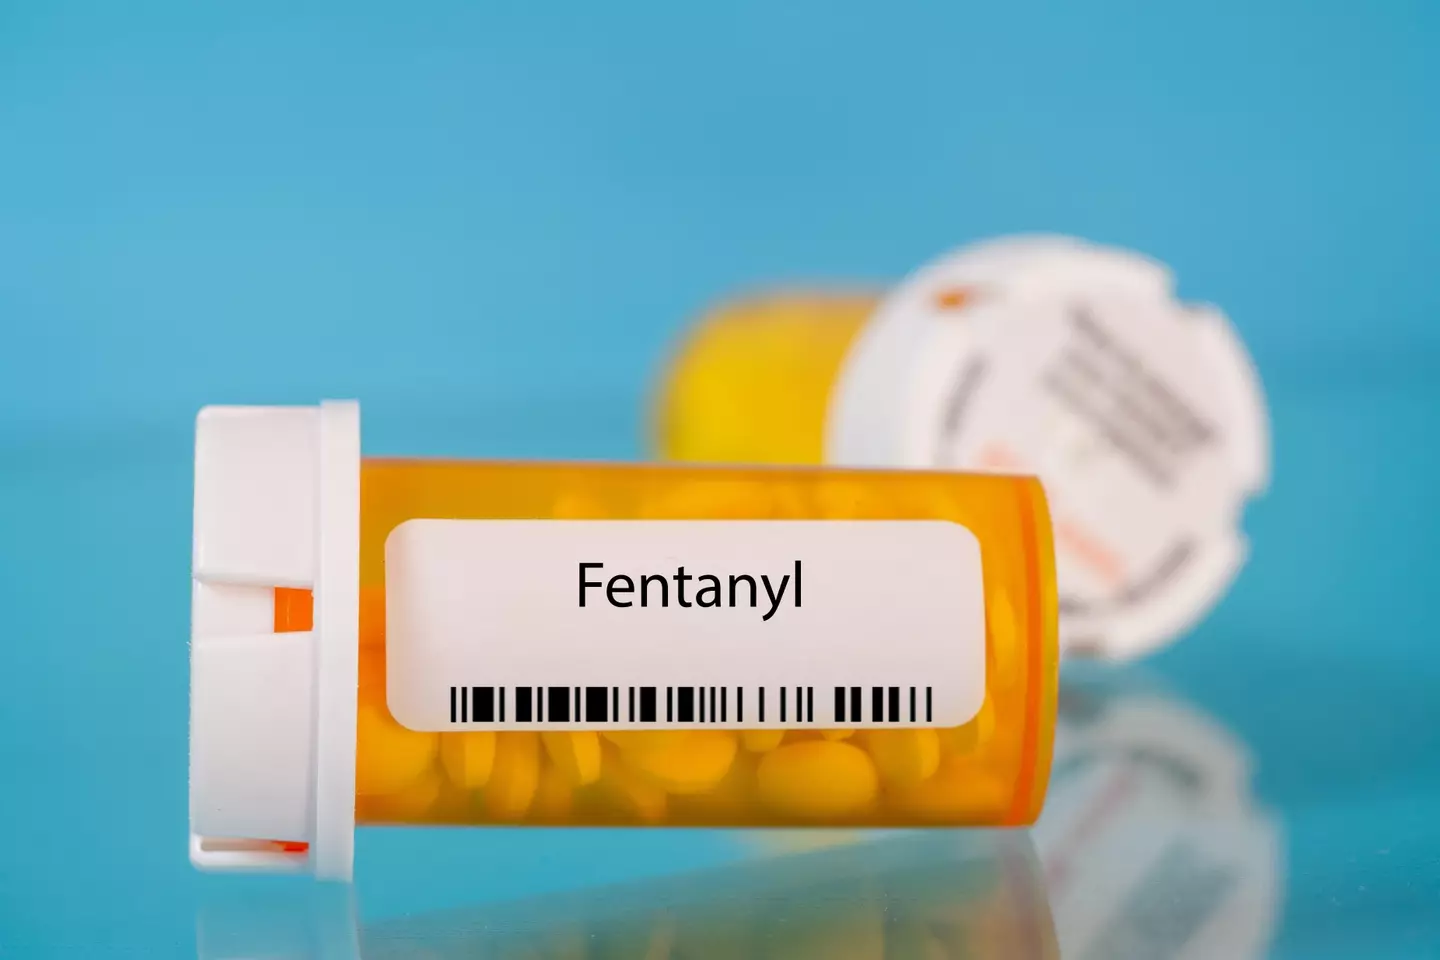 According to the CDC, fentanyl and other synthetic opioids are the most common drugs involved in overdose deaths in the US.